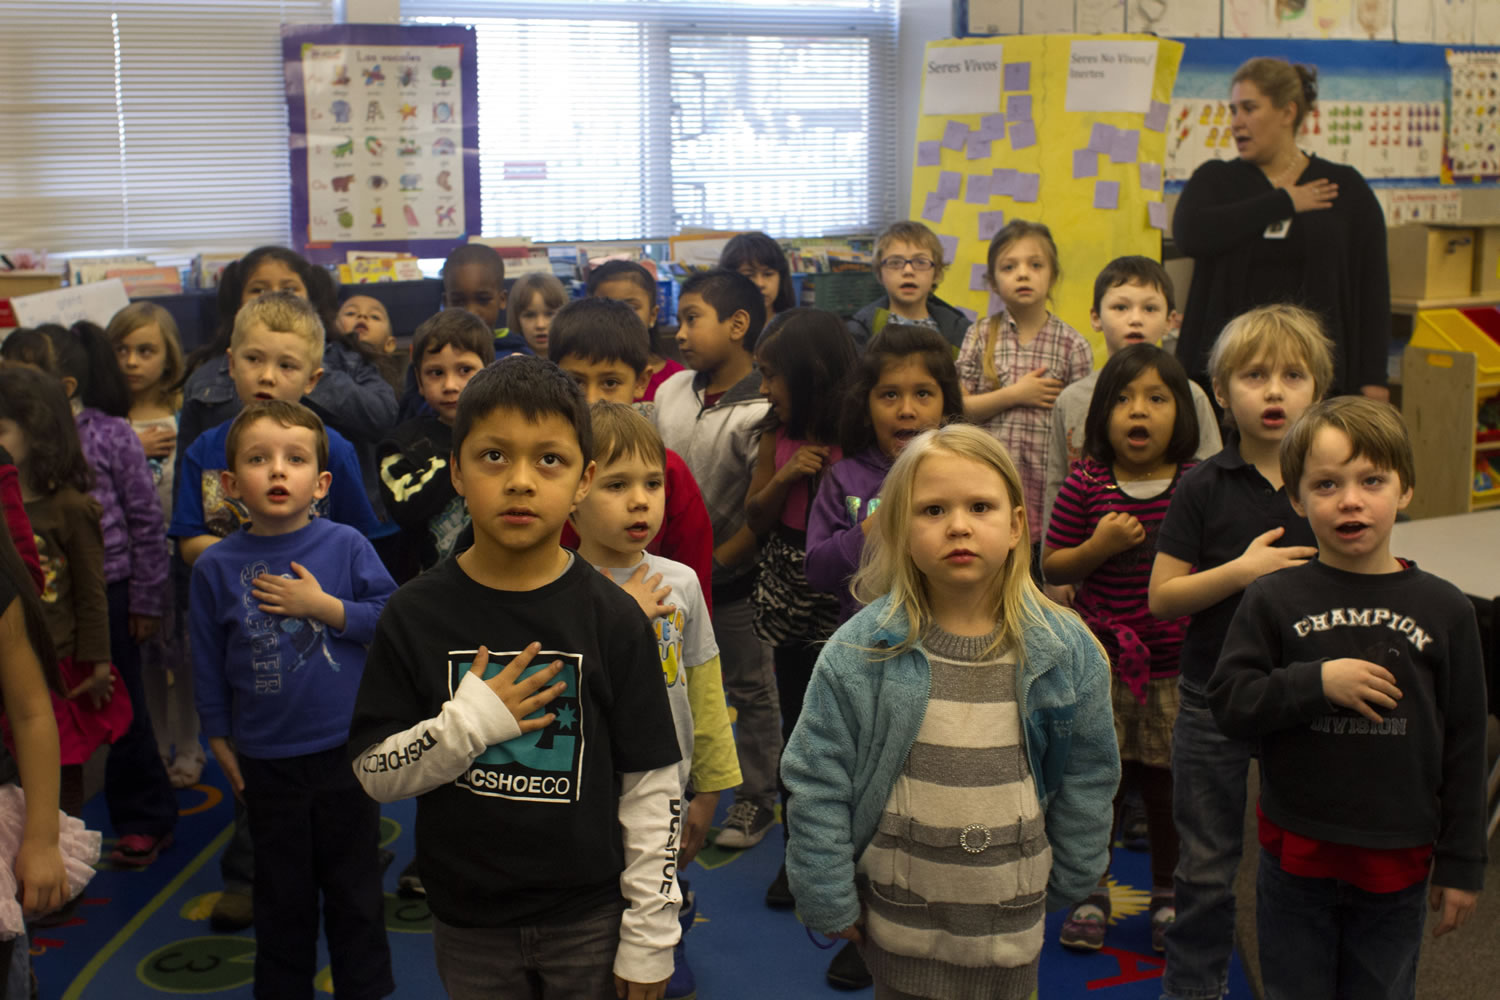 Kindergarten students at Metzger Elementary School in Tigard, Ore., start the day March 4 with the Pledge of Allegiance in Spanish.